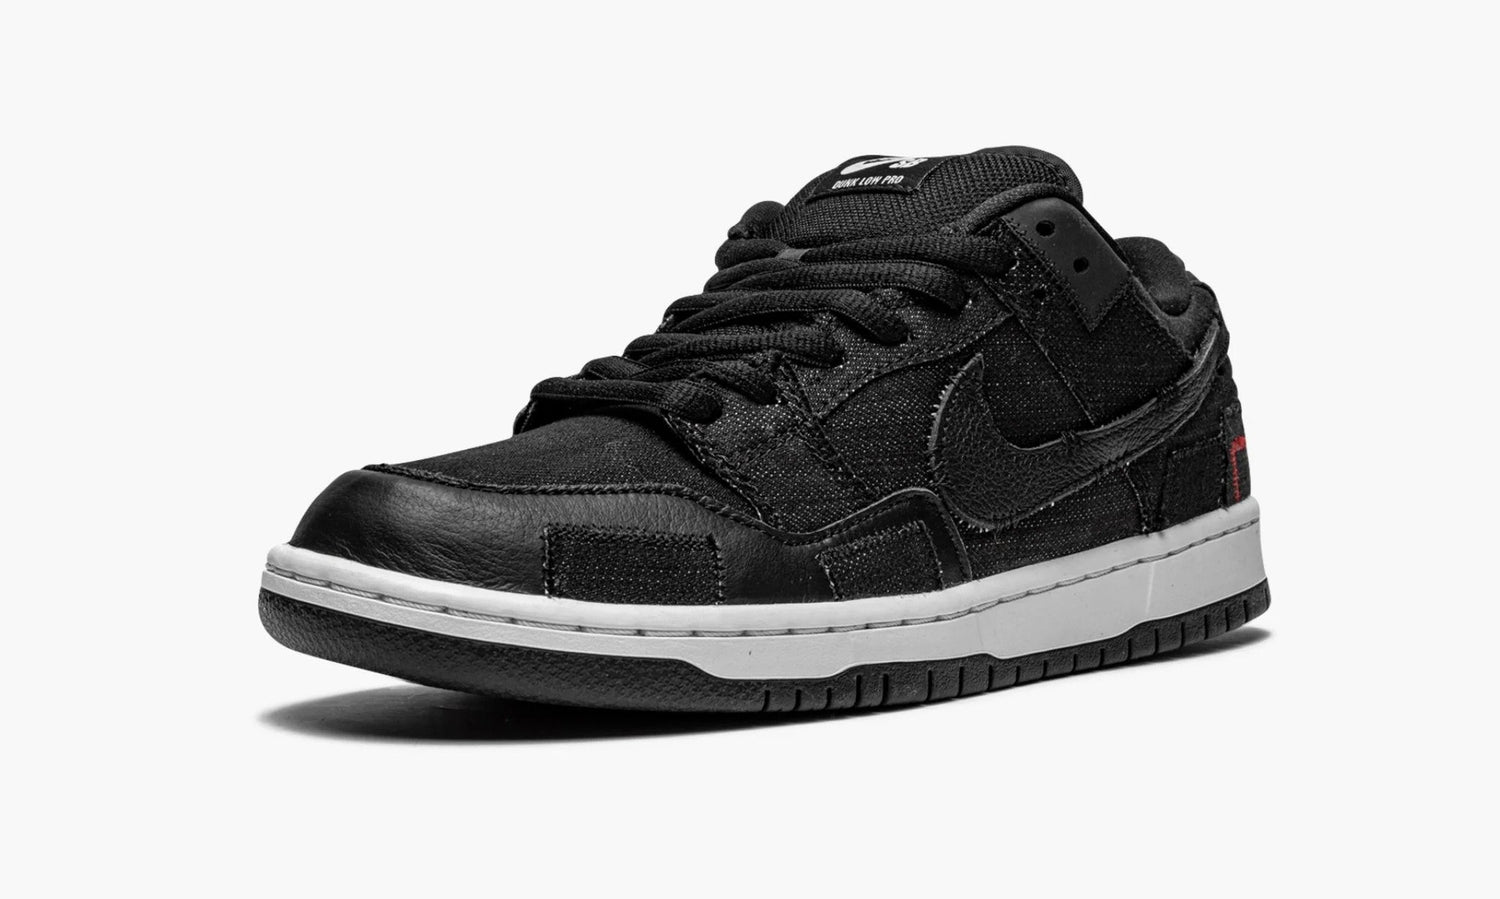 Dunk Low SB "Wasted Youth" - DD8386 001 | Grailshop